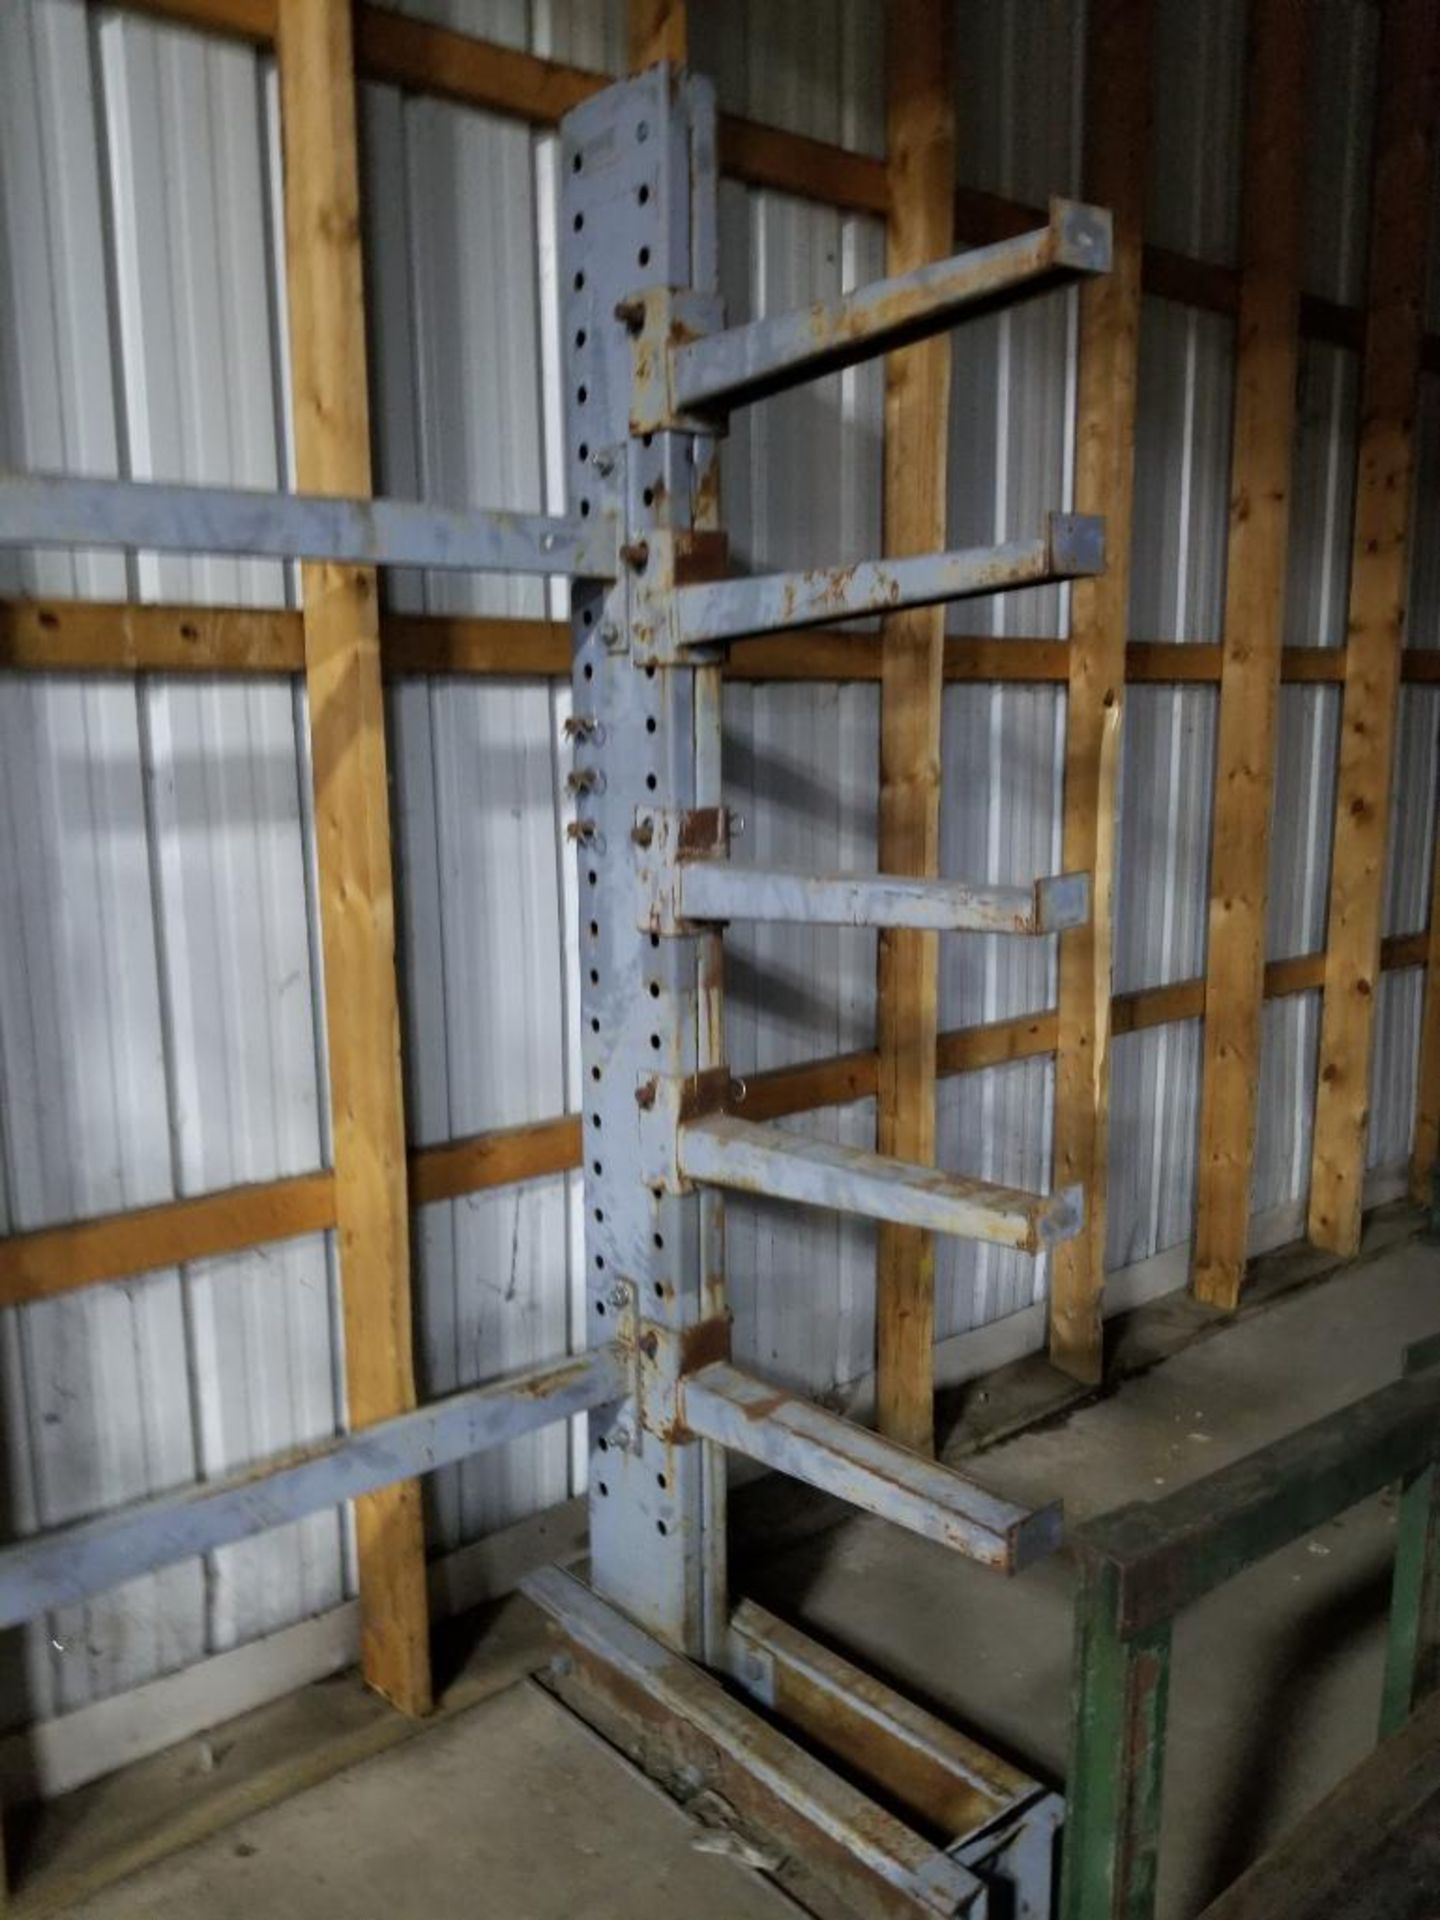 Cantilever stock rack. - Image 3 of 3